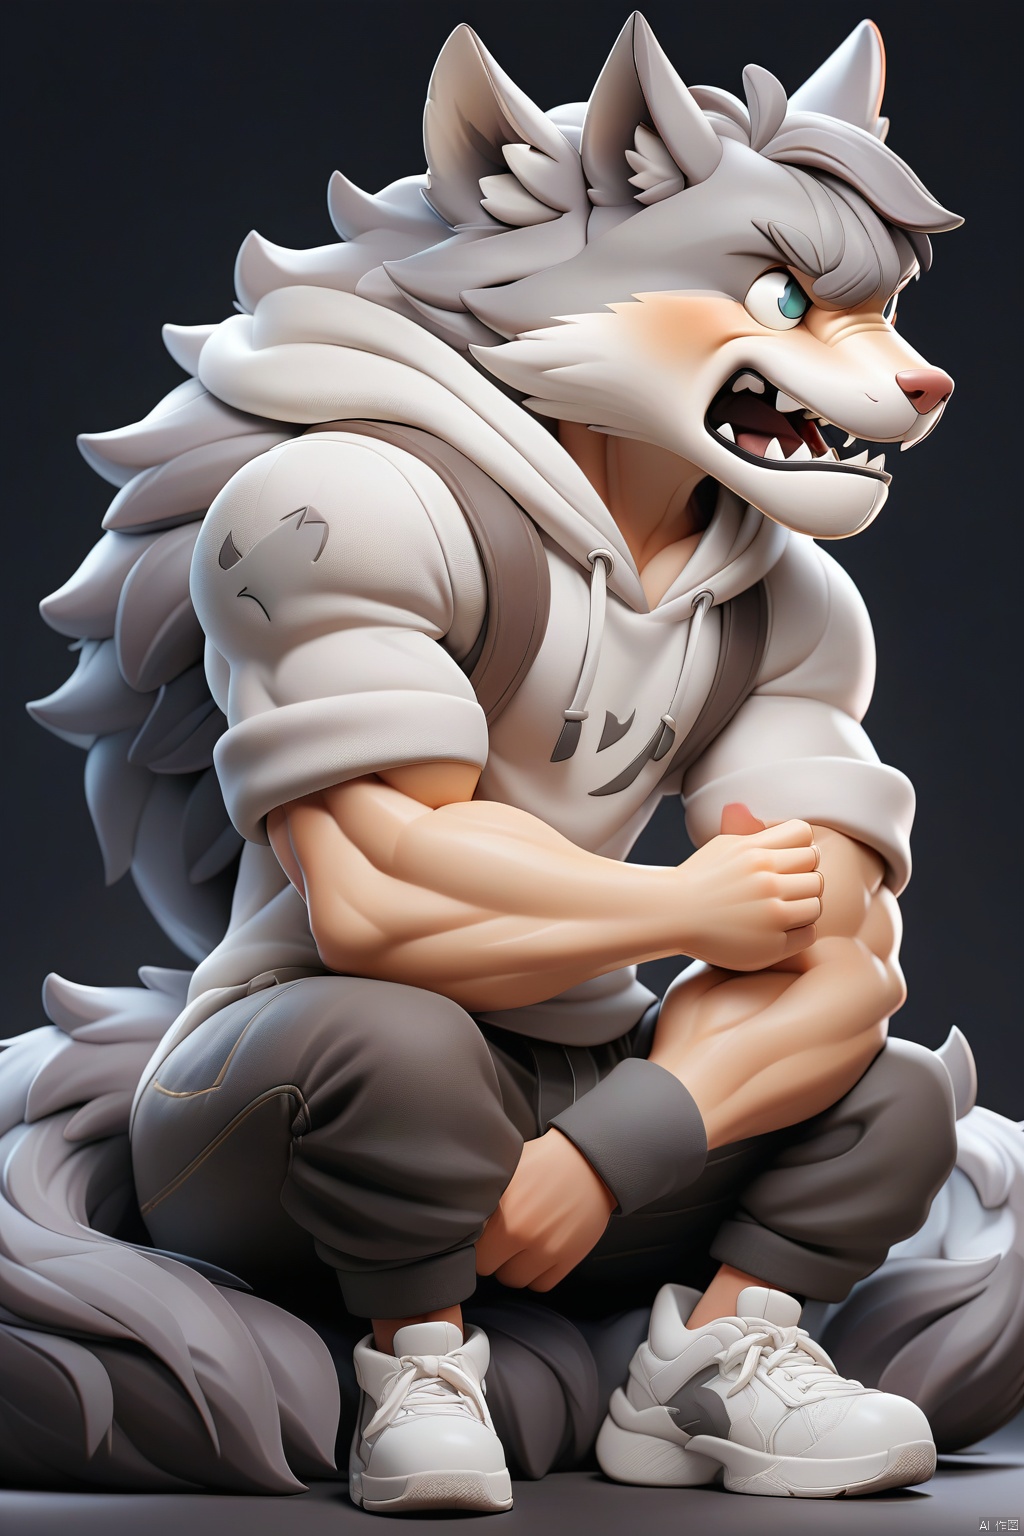 This digital artwork presents a figure dressed in a white hoodie and pants,sitting with their legs crossed. They wear white sneakers with black detailing. Their hair falls loosely around their shoulders and back. Behind this figure looms a formidable gray wolf,its expression fierce,with sharp canines bared and eyes glowing intensely. The wolf's fur is detailed with varying shades of gray,capturing the animal's muscular build and powerful stature. The overall mood of the image is somber and intense,accentuated by the dark background that fades into obscurity, masterpiece,best quality,very aesthetic,absurdres,